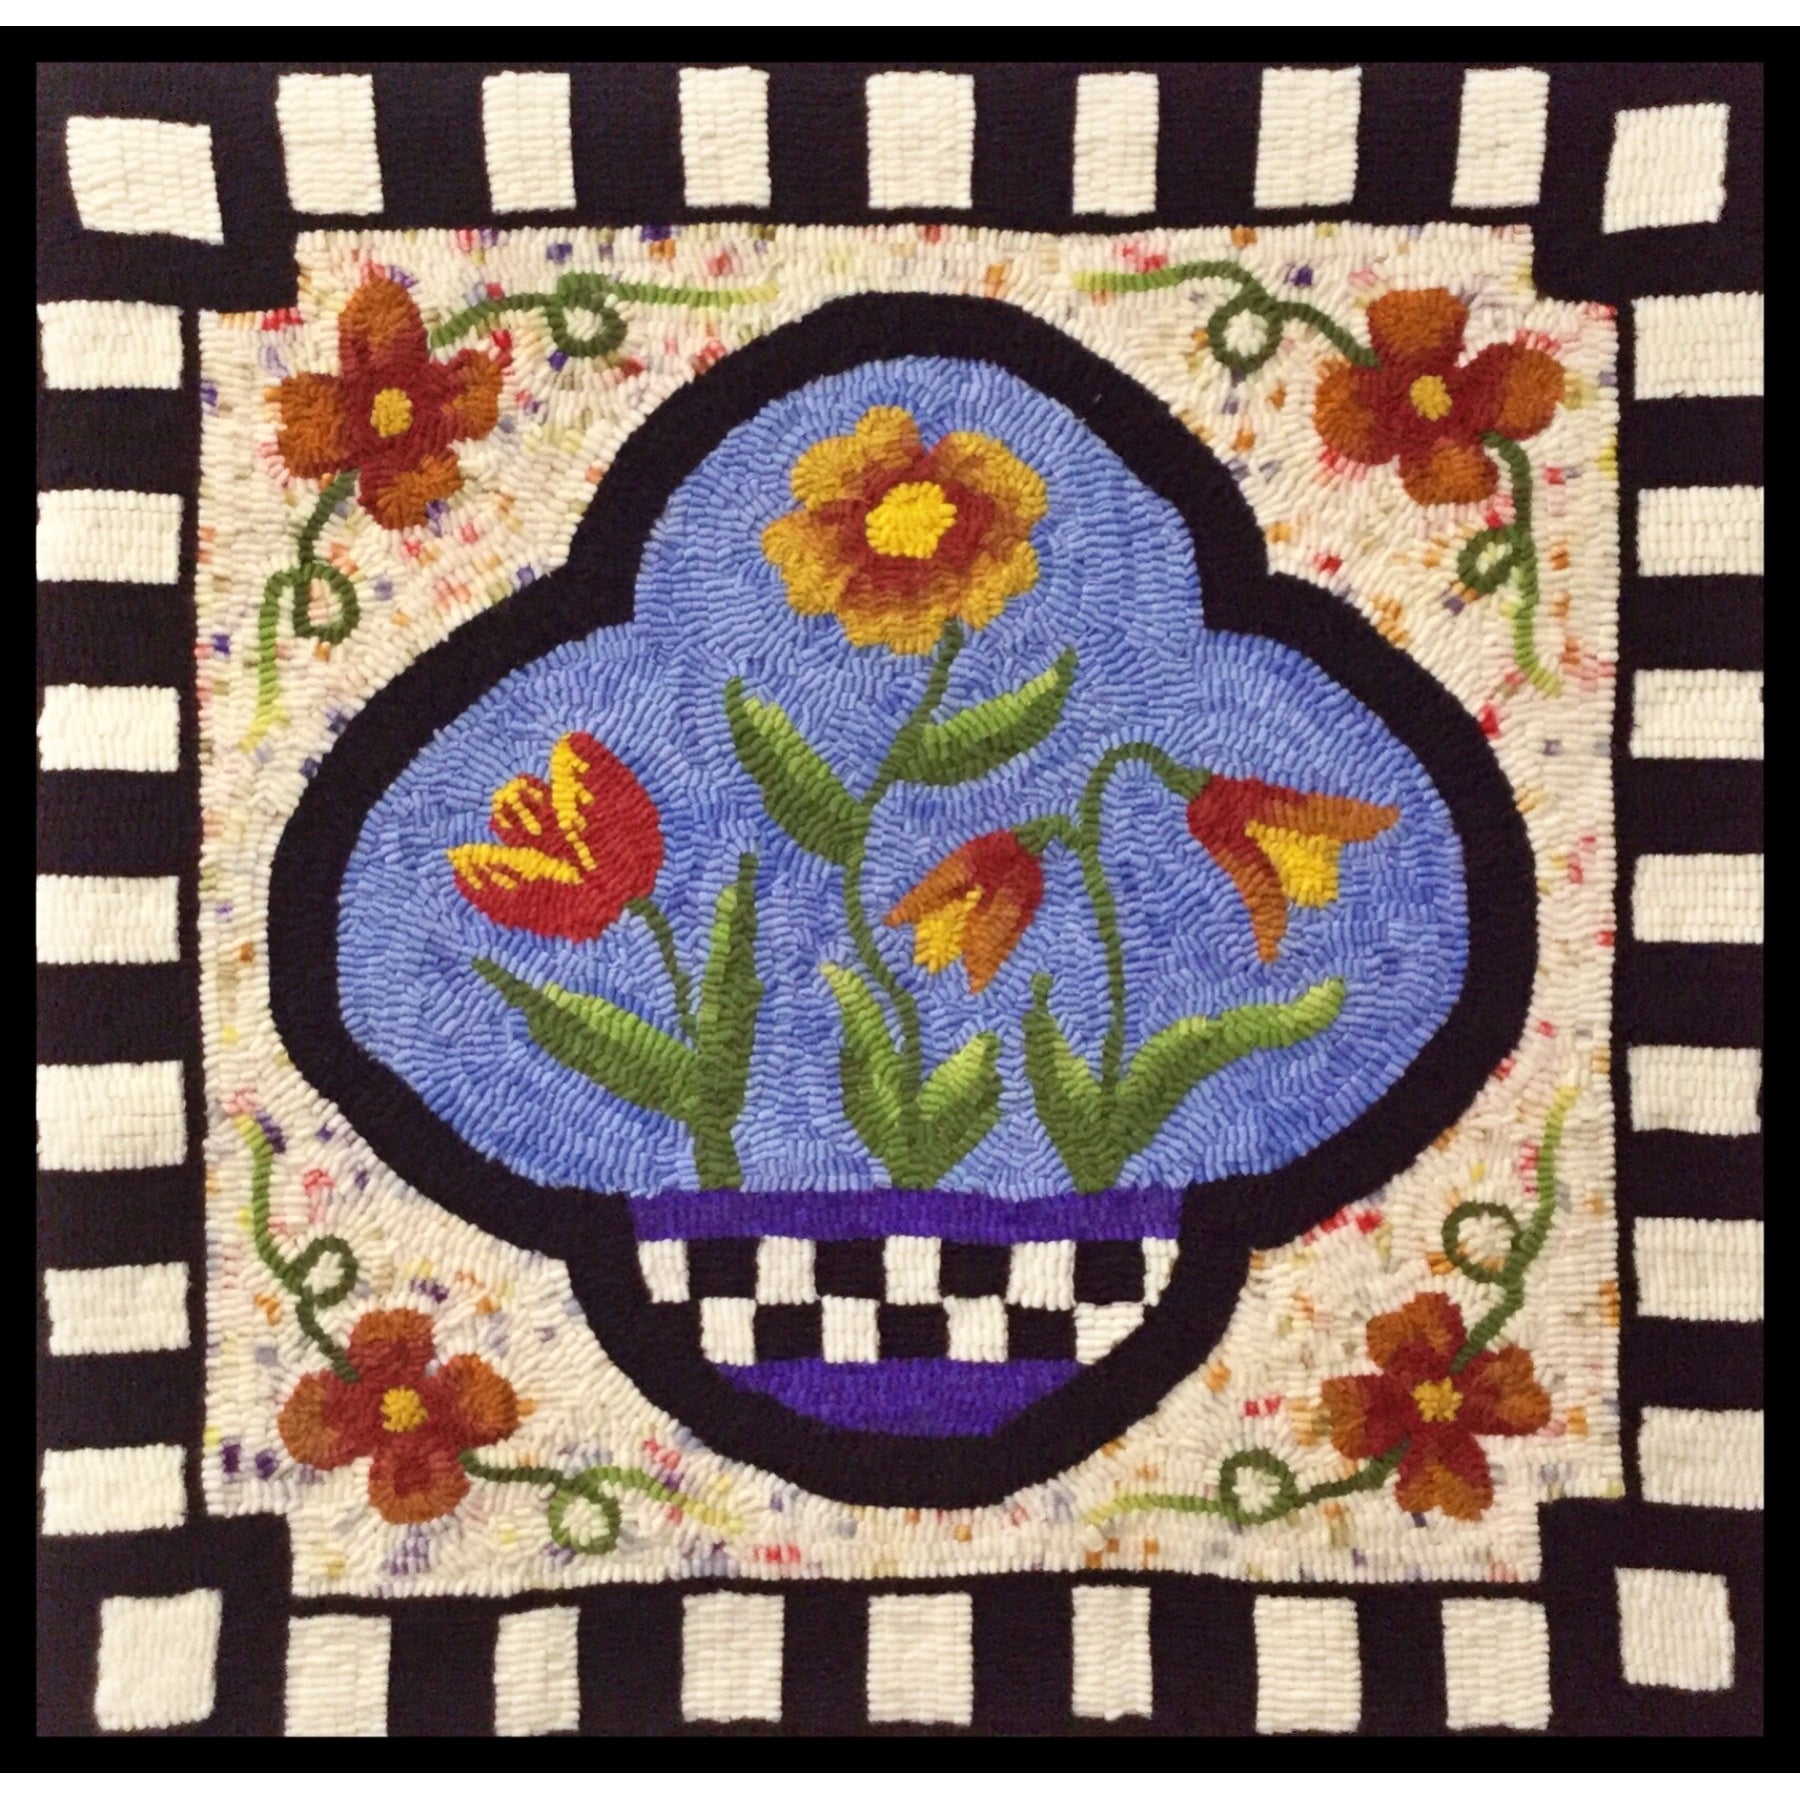 Floral Window, rug hooked by Brenda Patterson